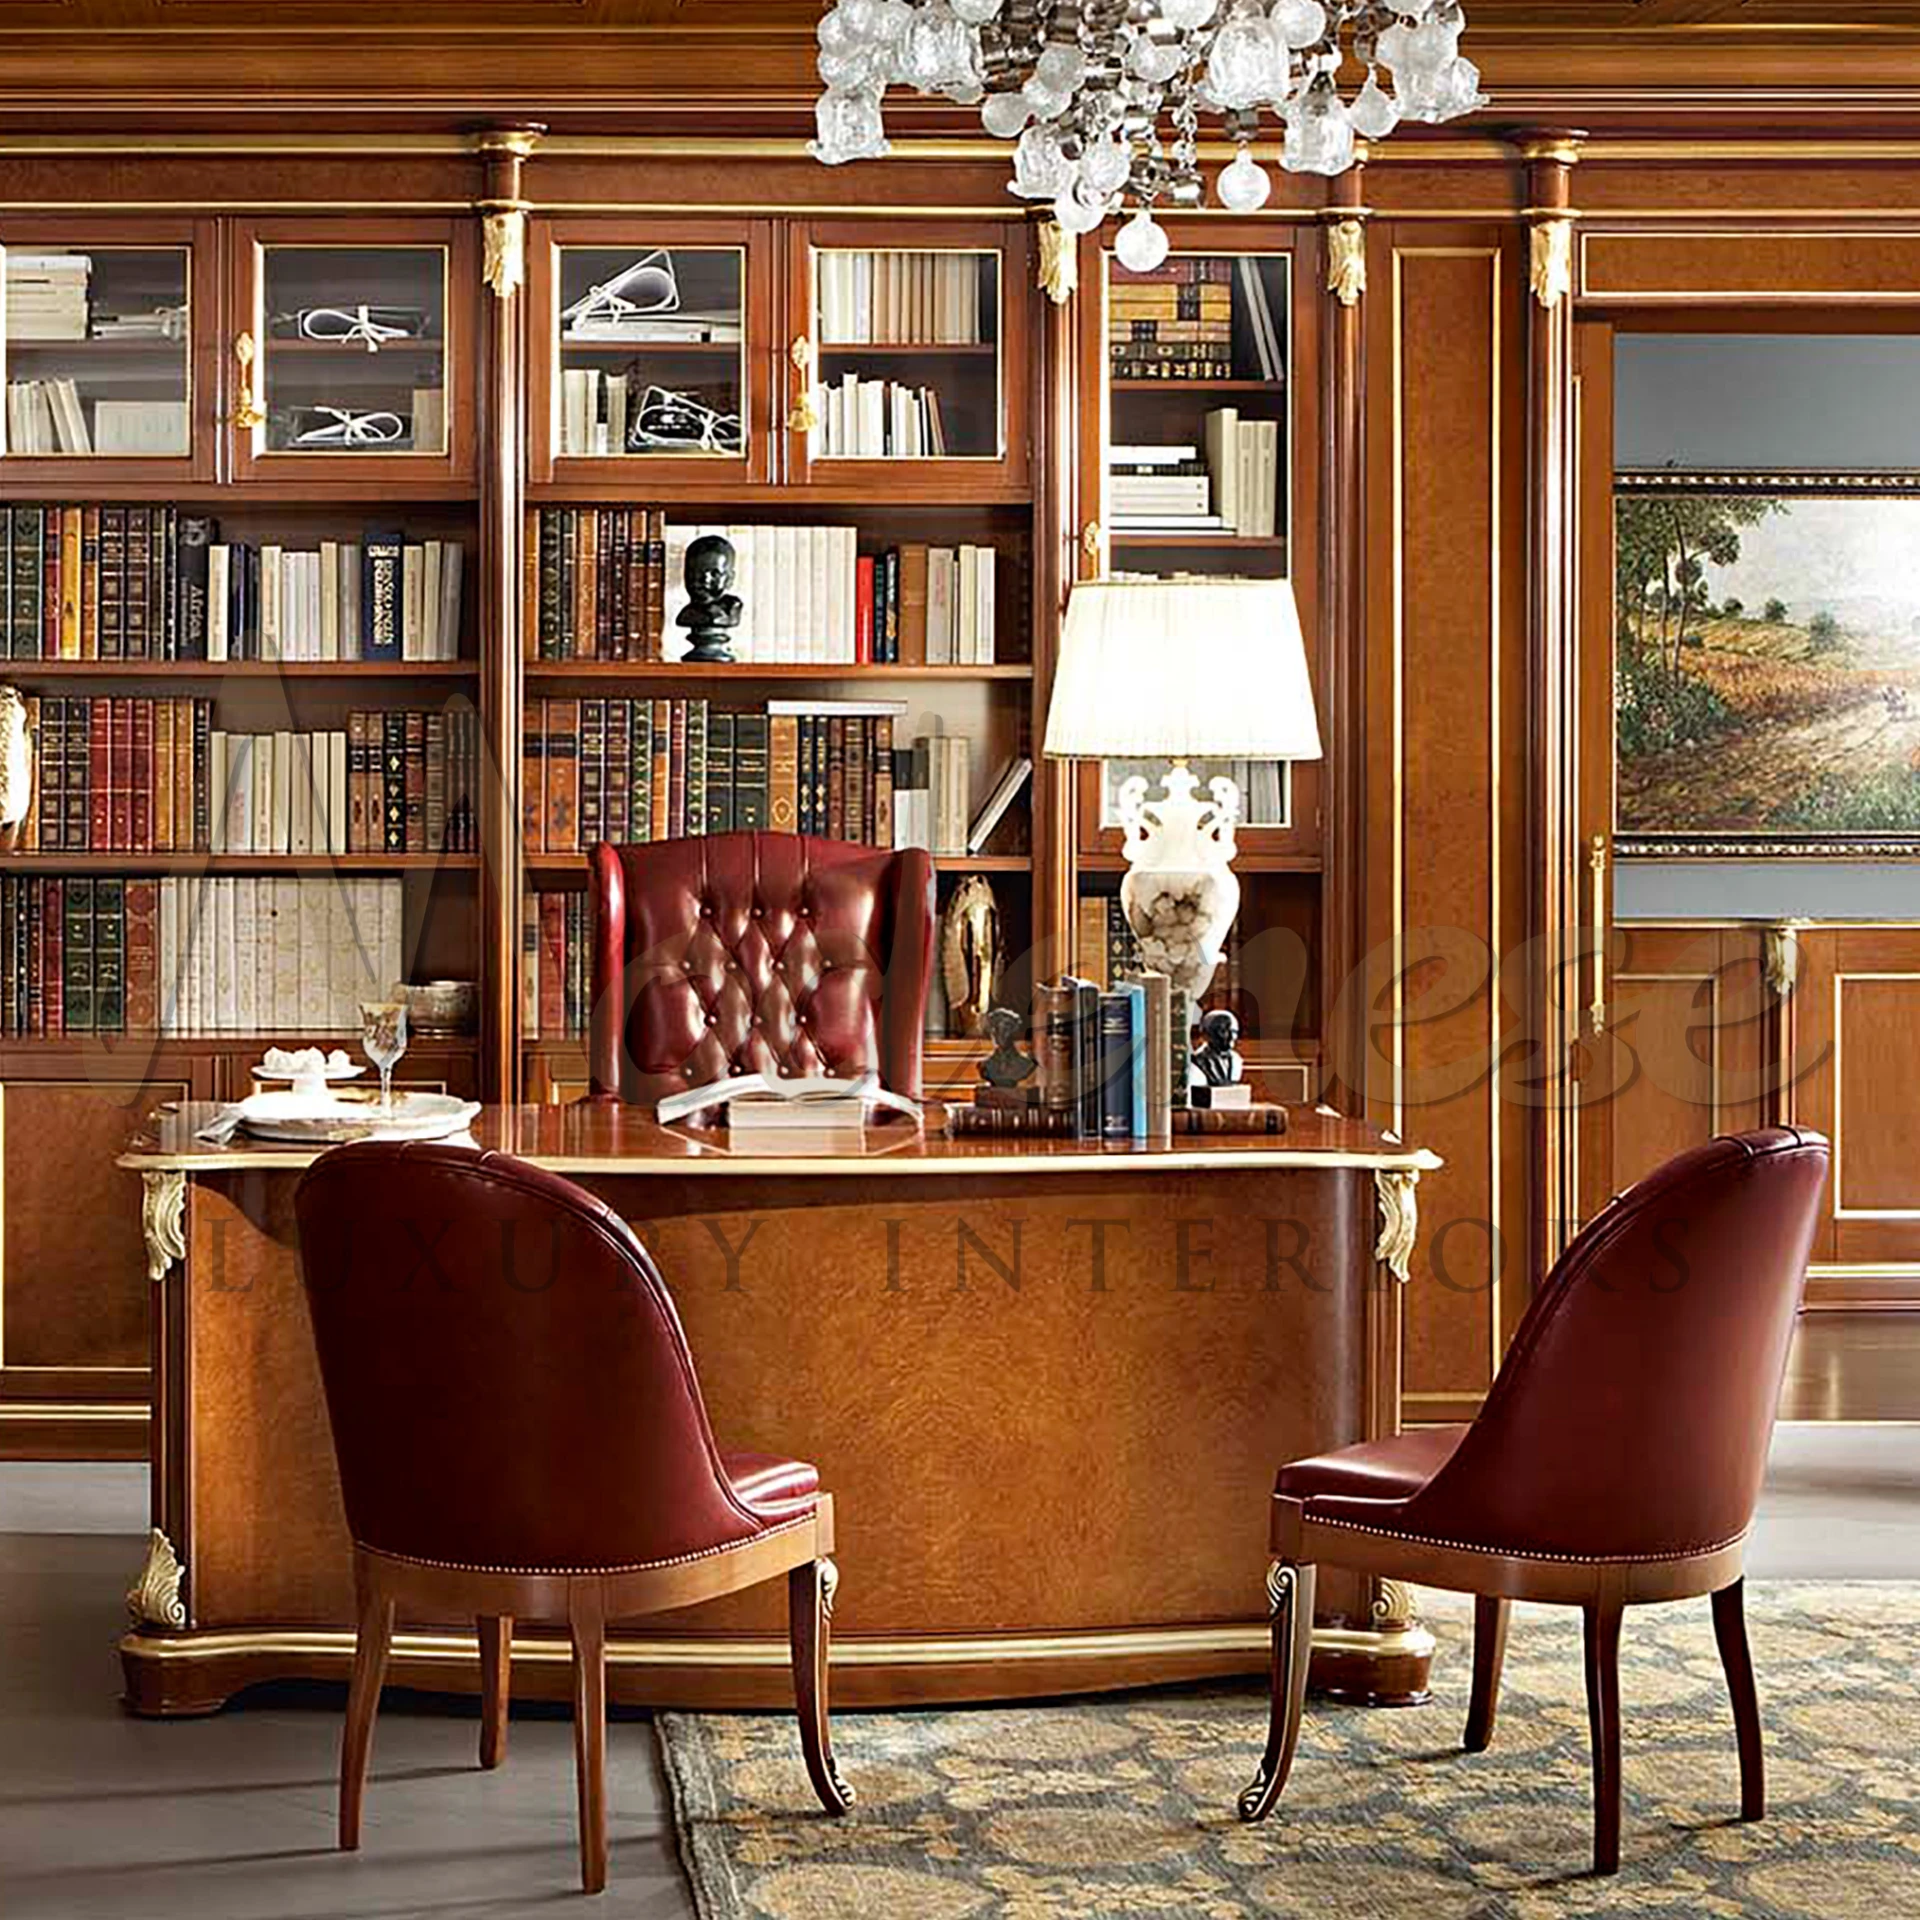 A well-appointed office with a spacious bookcase, President Office Armchair chair and desk